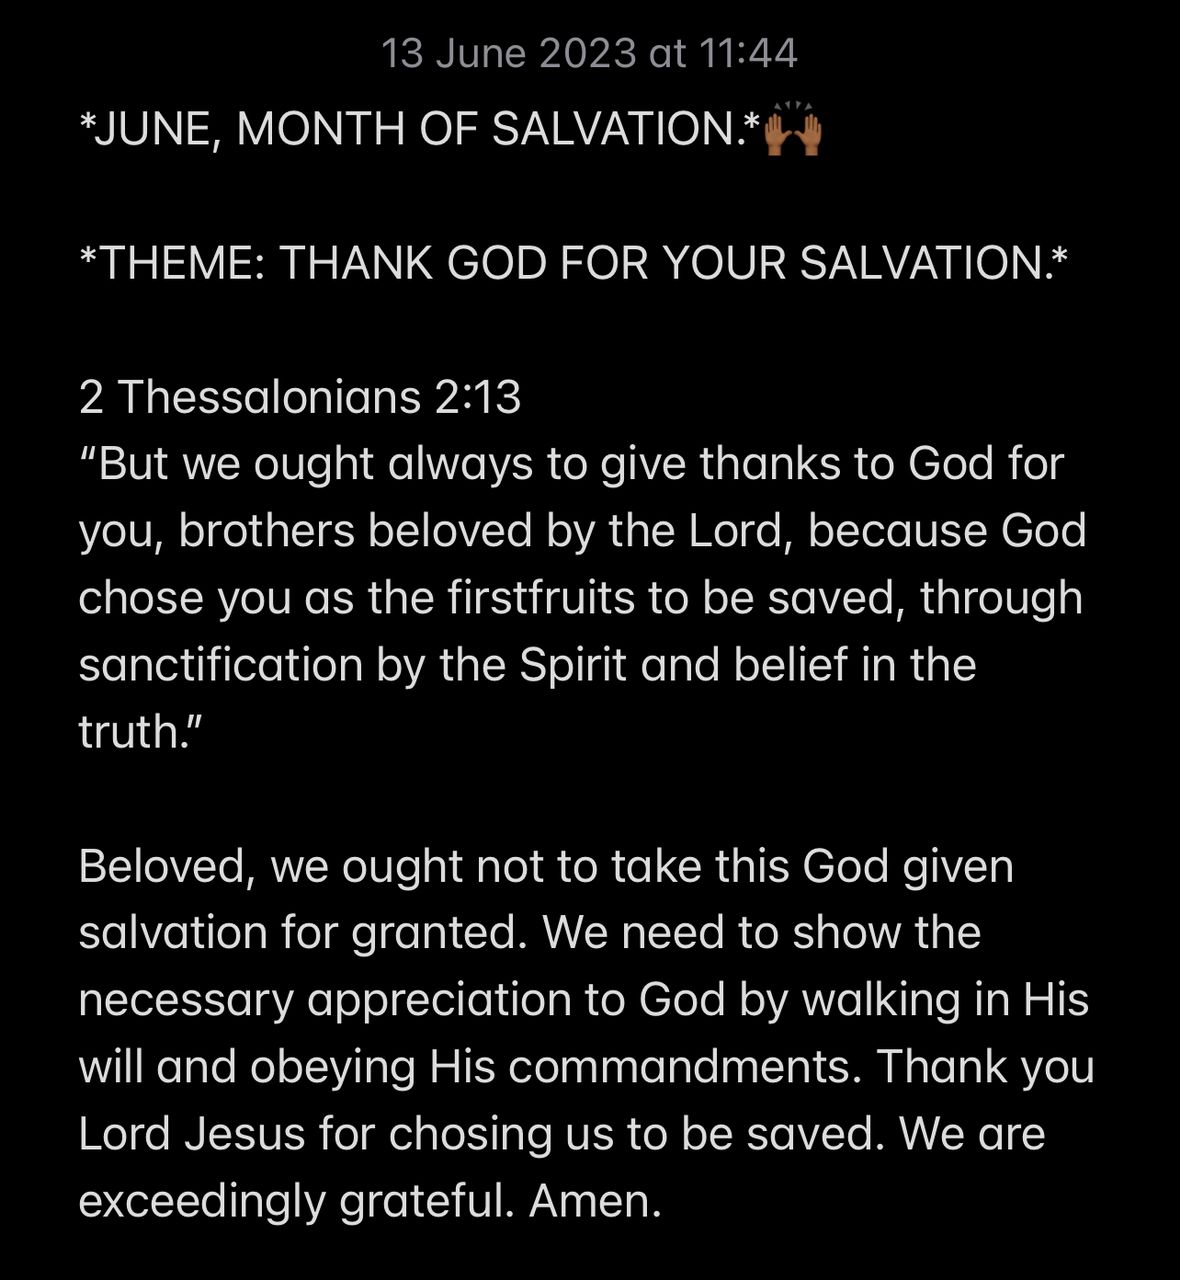 THANK GOD FOR YOUR SALVATION